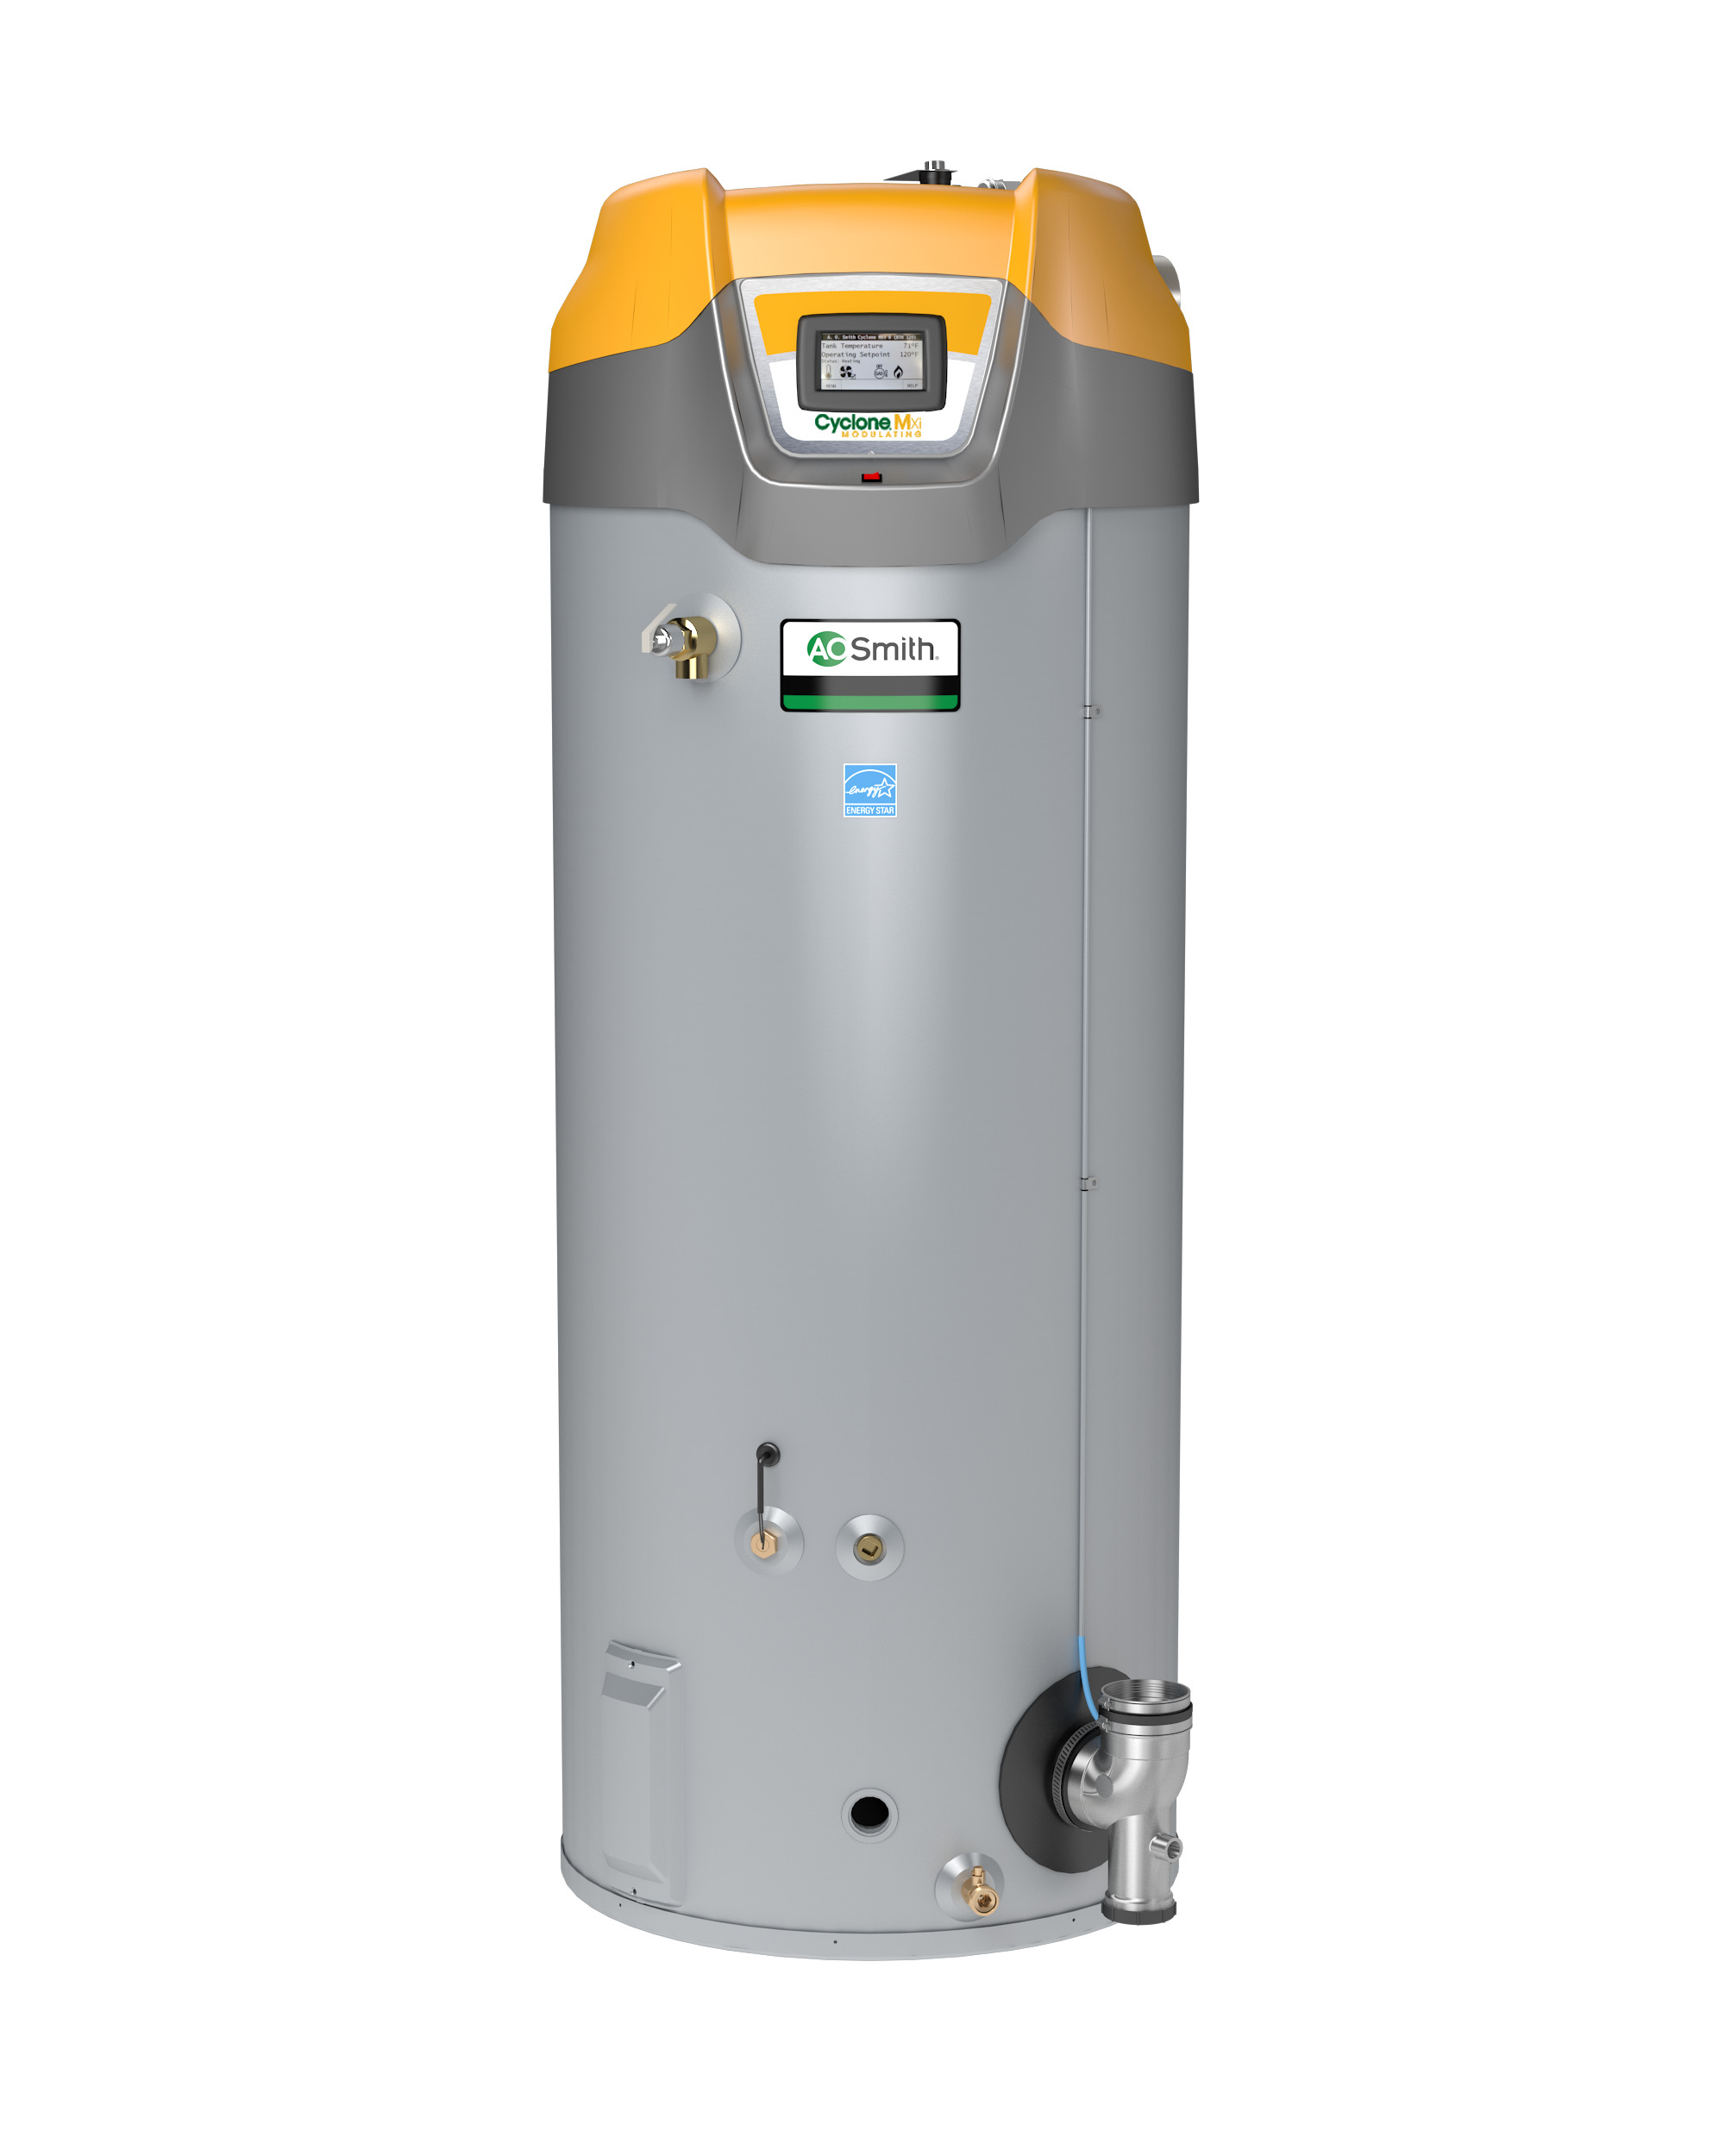 AO SMITH BTH-199A: 100 GALLON, 199,000 BTU, ASME, 3inch VENT, UP TO 97% THERMAL EFFICIENCY, NATURAL GAS, CYCLONE Mxi MODULATING COMMERCIAL GAS WATER HEATER